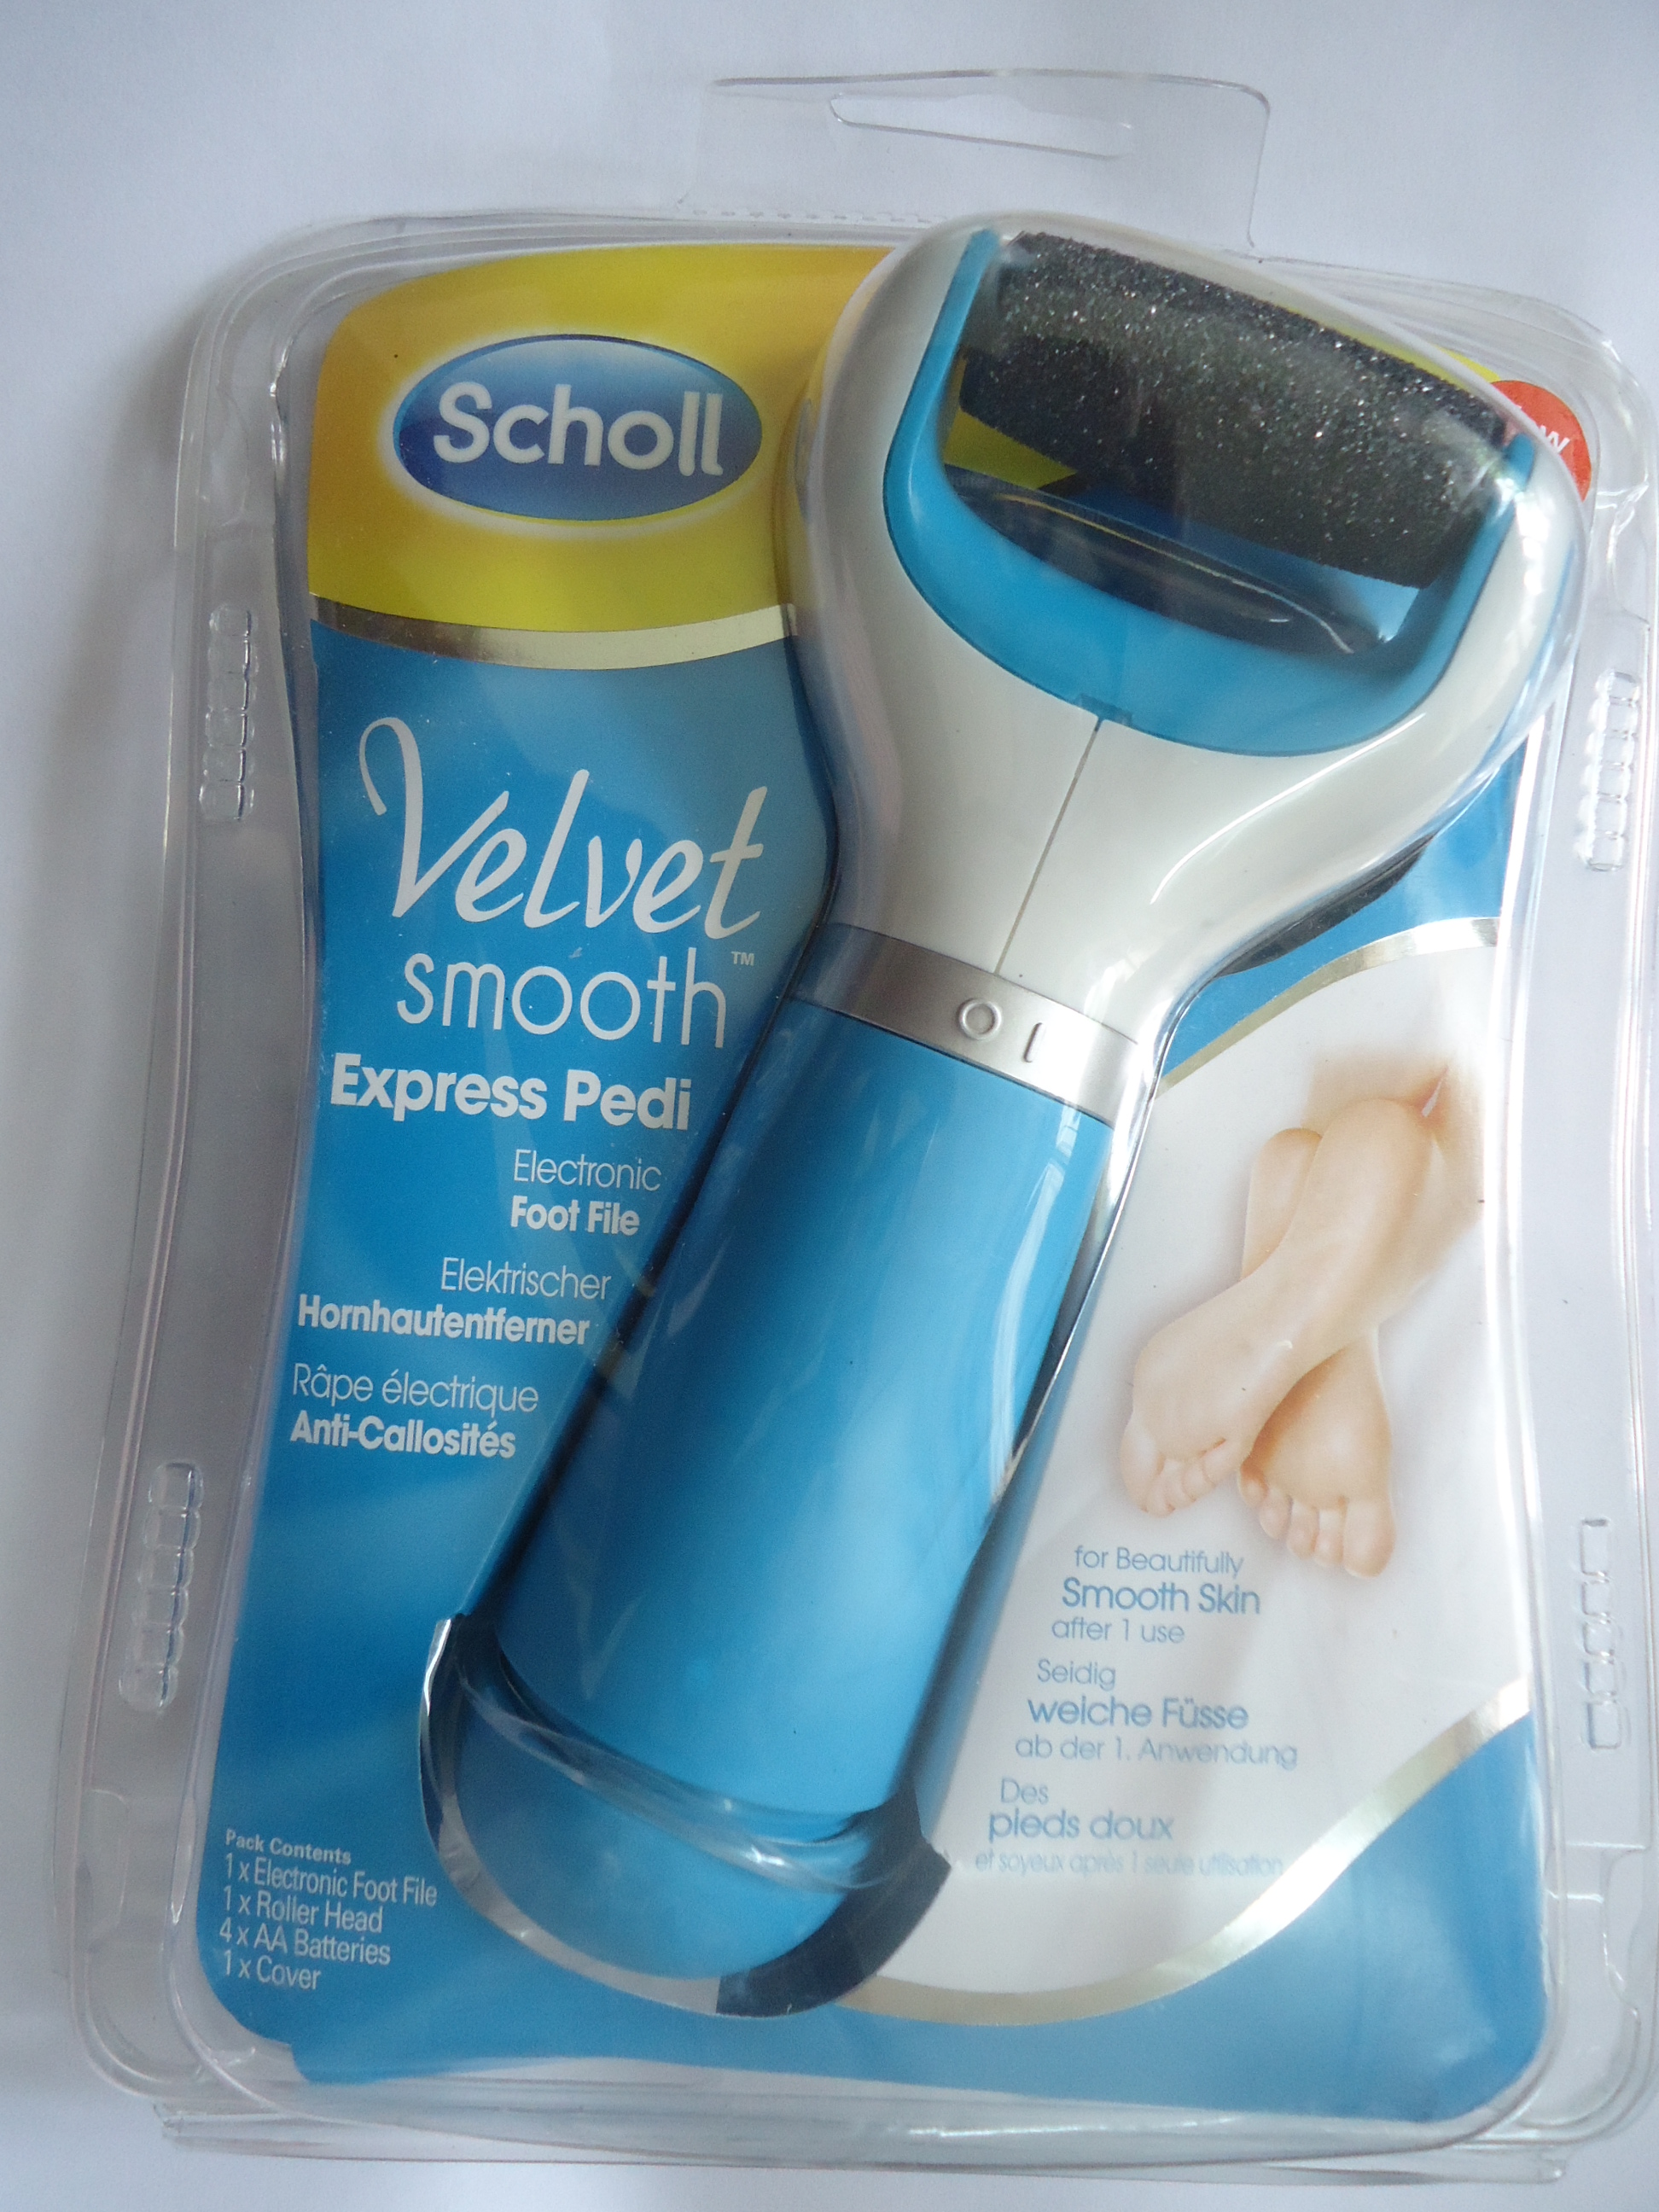 Oude man interieur Rentmeester Scholl Velvet Smooth Express Pedi Electronic Foot File Review - New Love -  Makeup